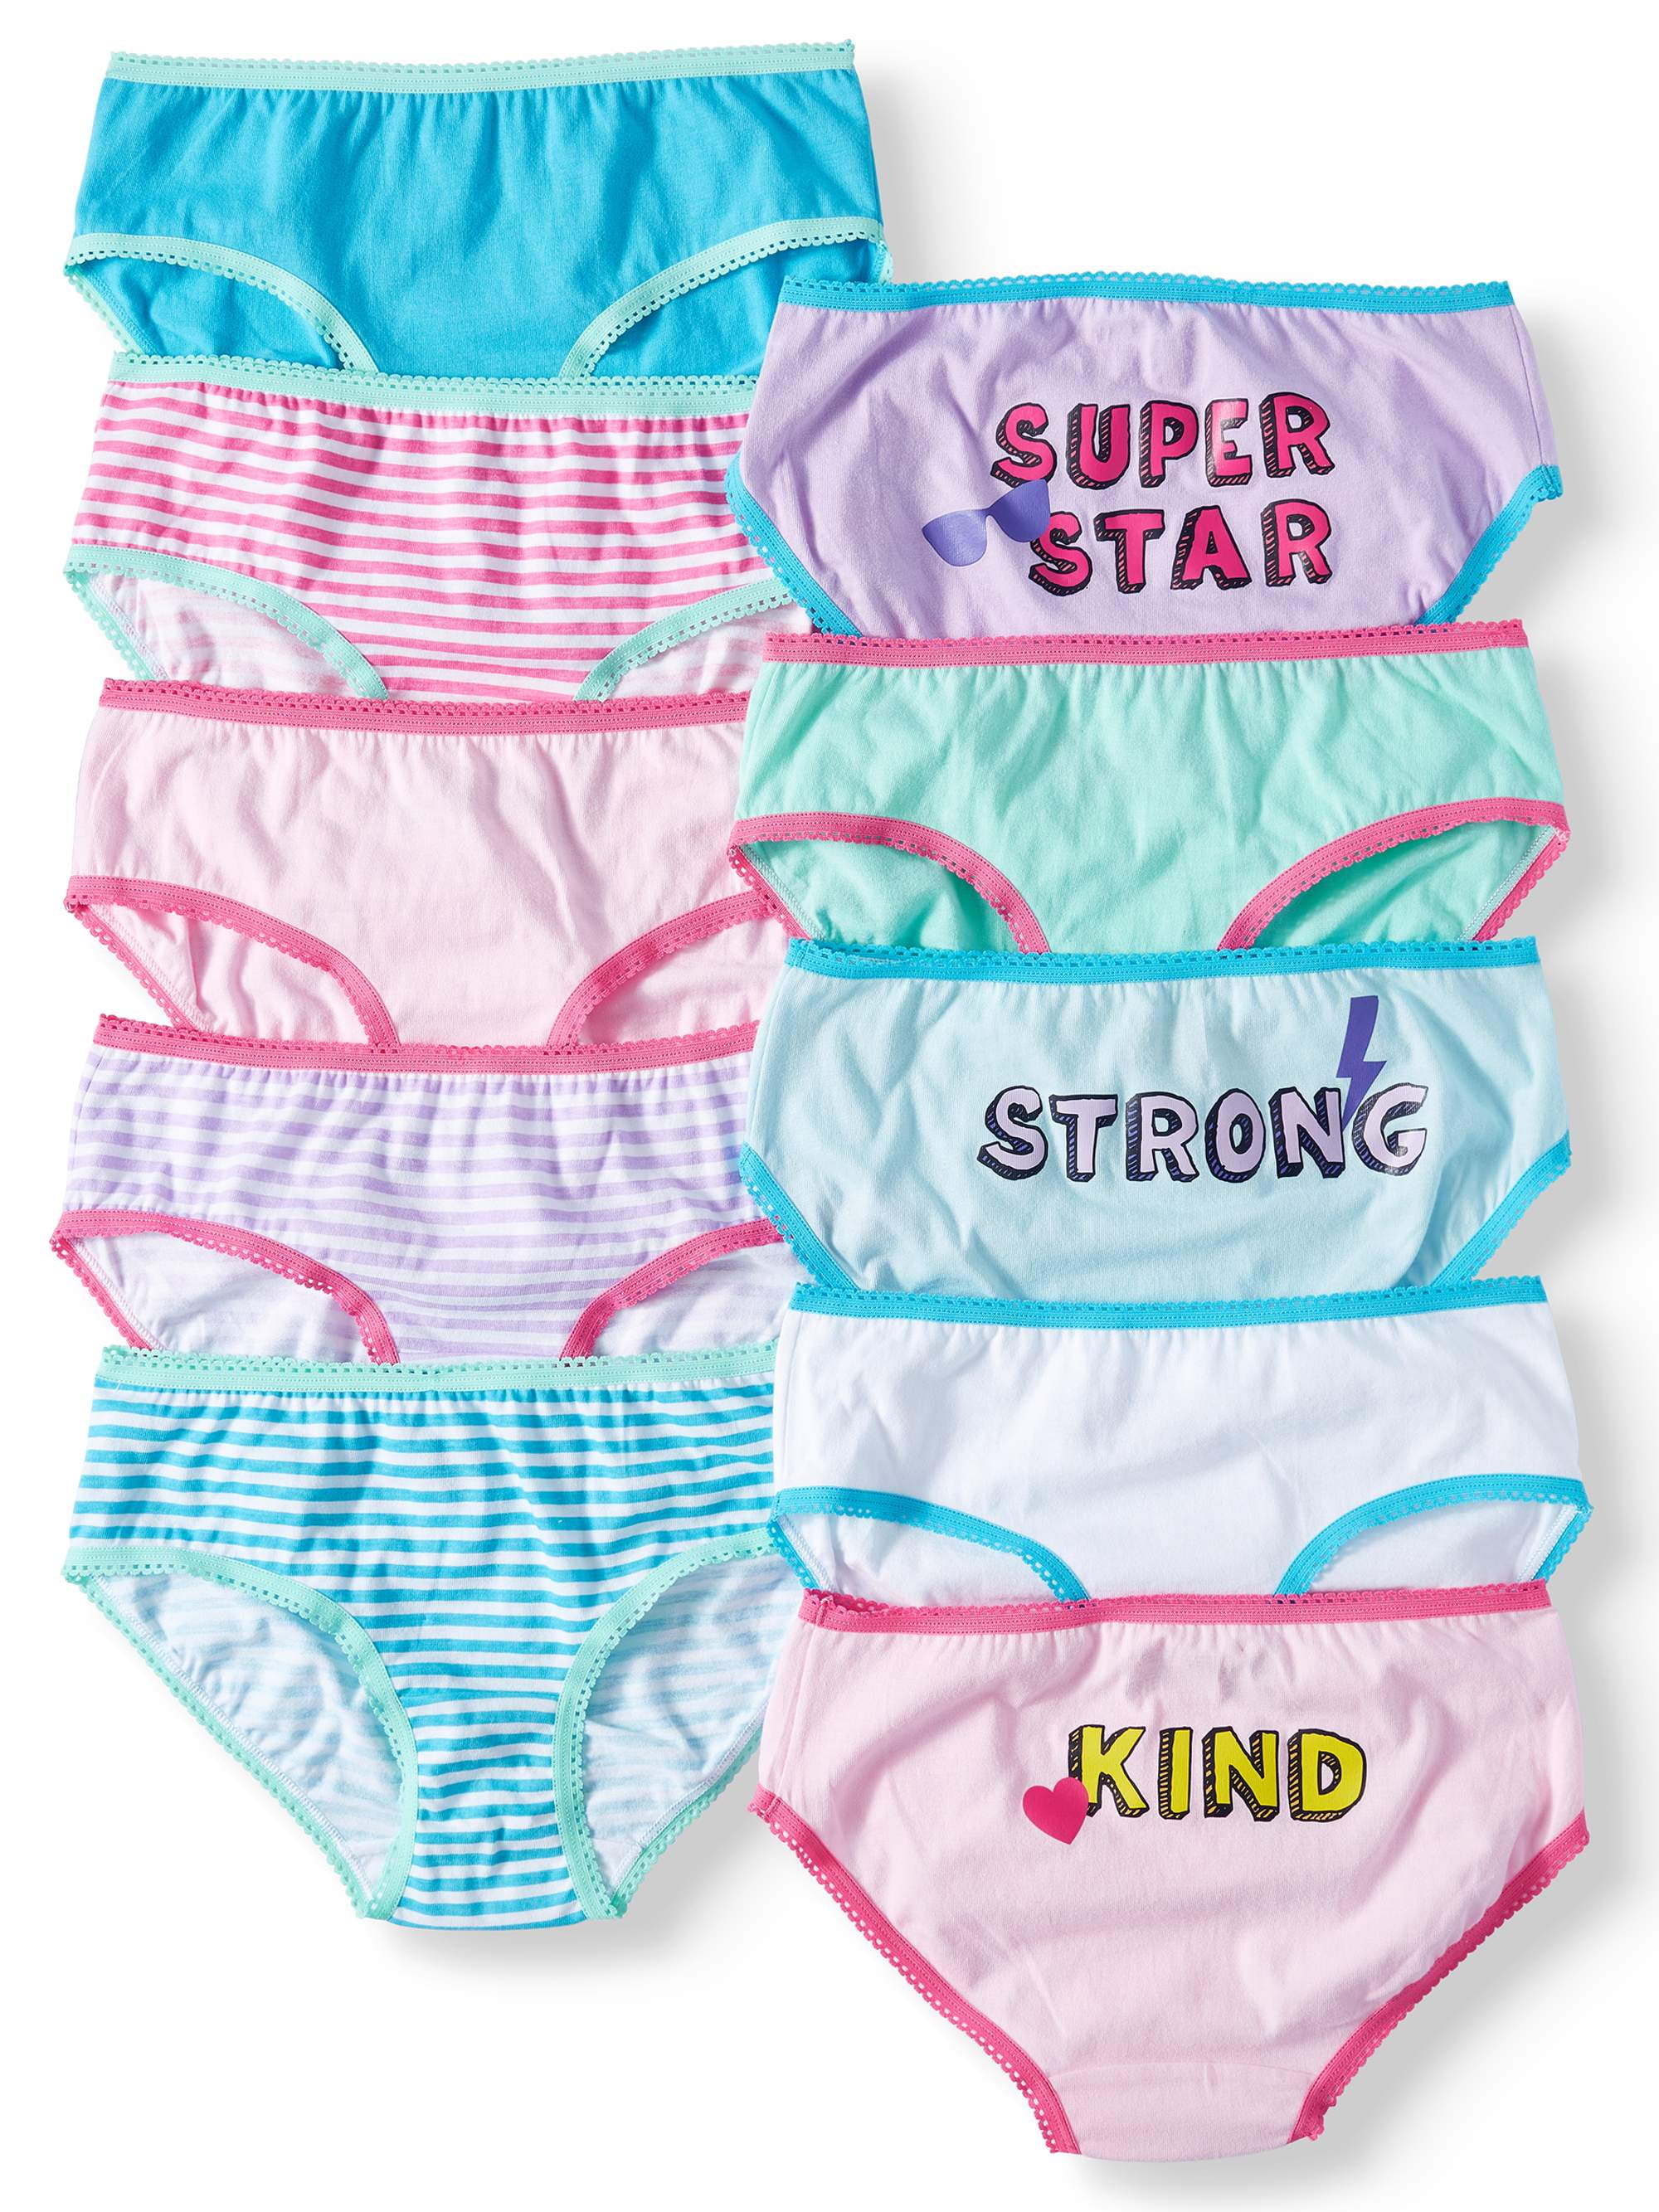 100% Cotton FROM USA Size 14 Years Old * 26 - 27 Inches Waist * 7pcs  Assorted Girls Brief Panties TAG FREE Panty Briefs WONDER NATION, Babies &  Kids, Babies & Kids Fashion on Carousell